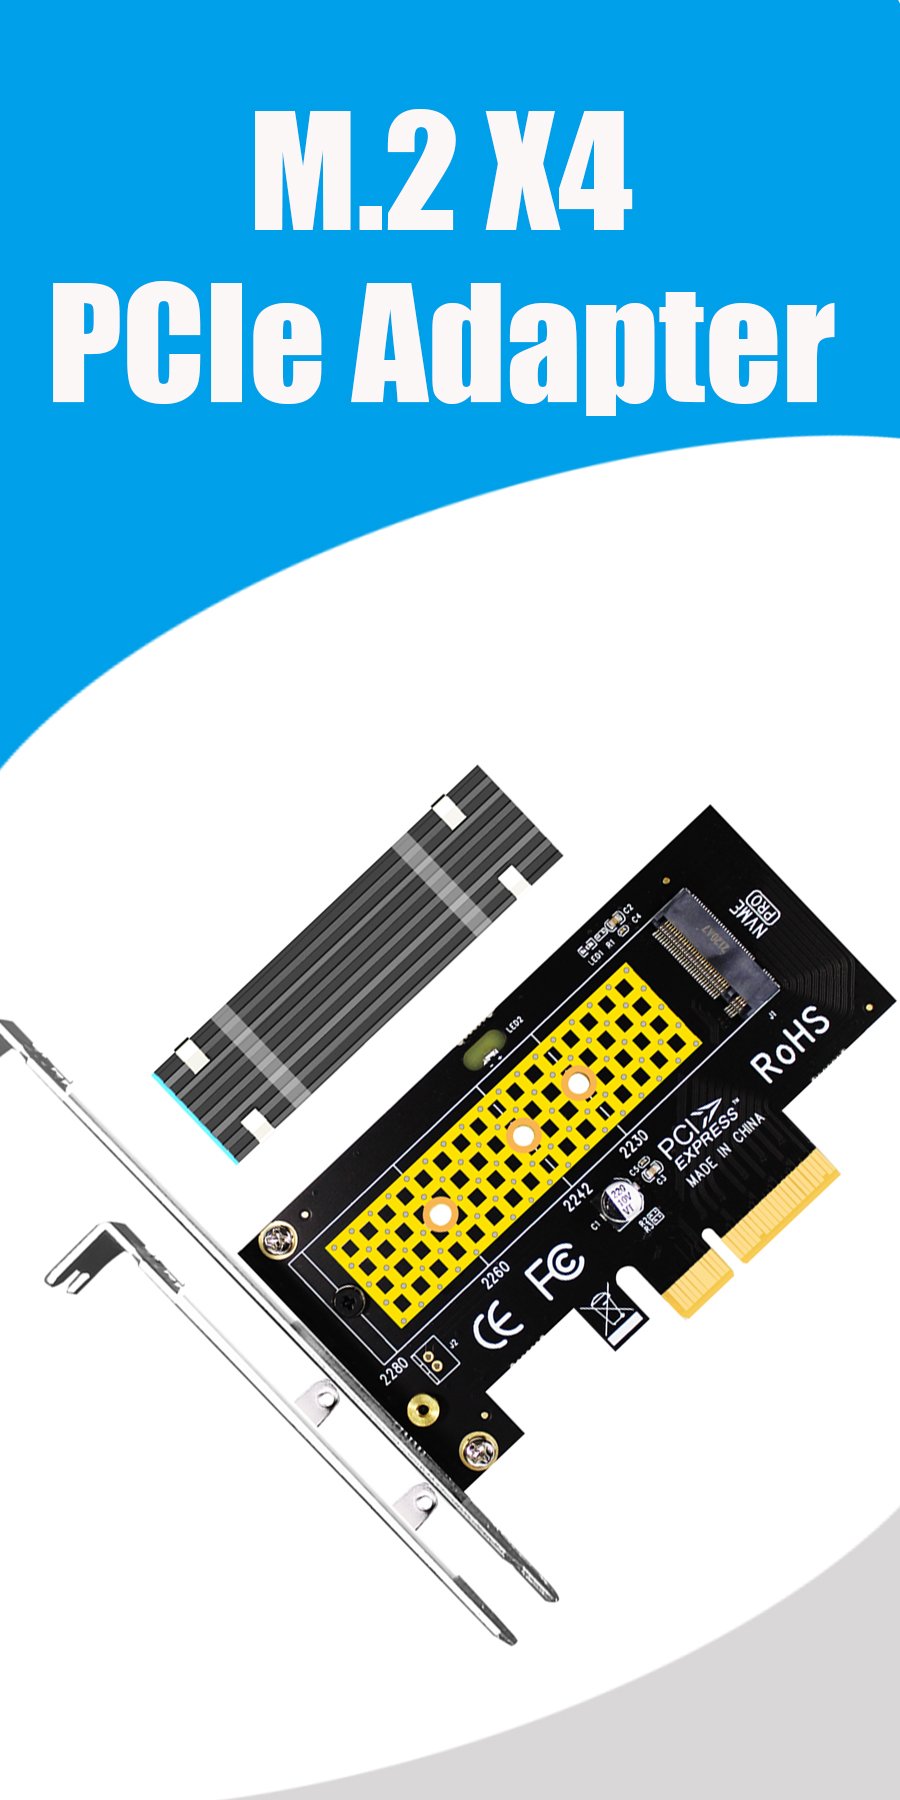 m.2 pcie adapter